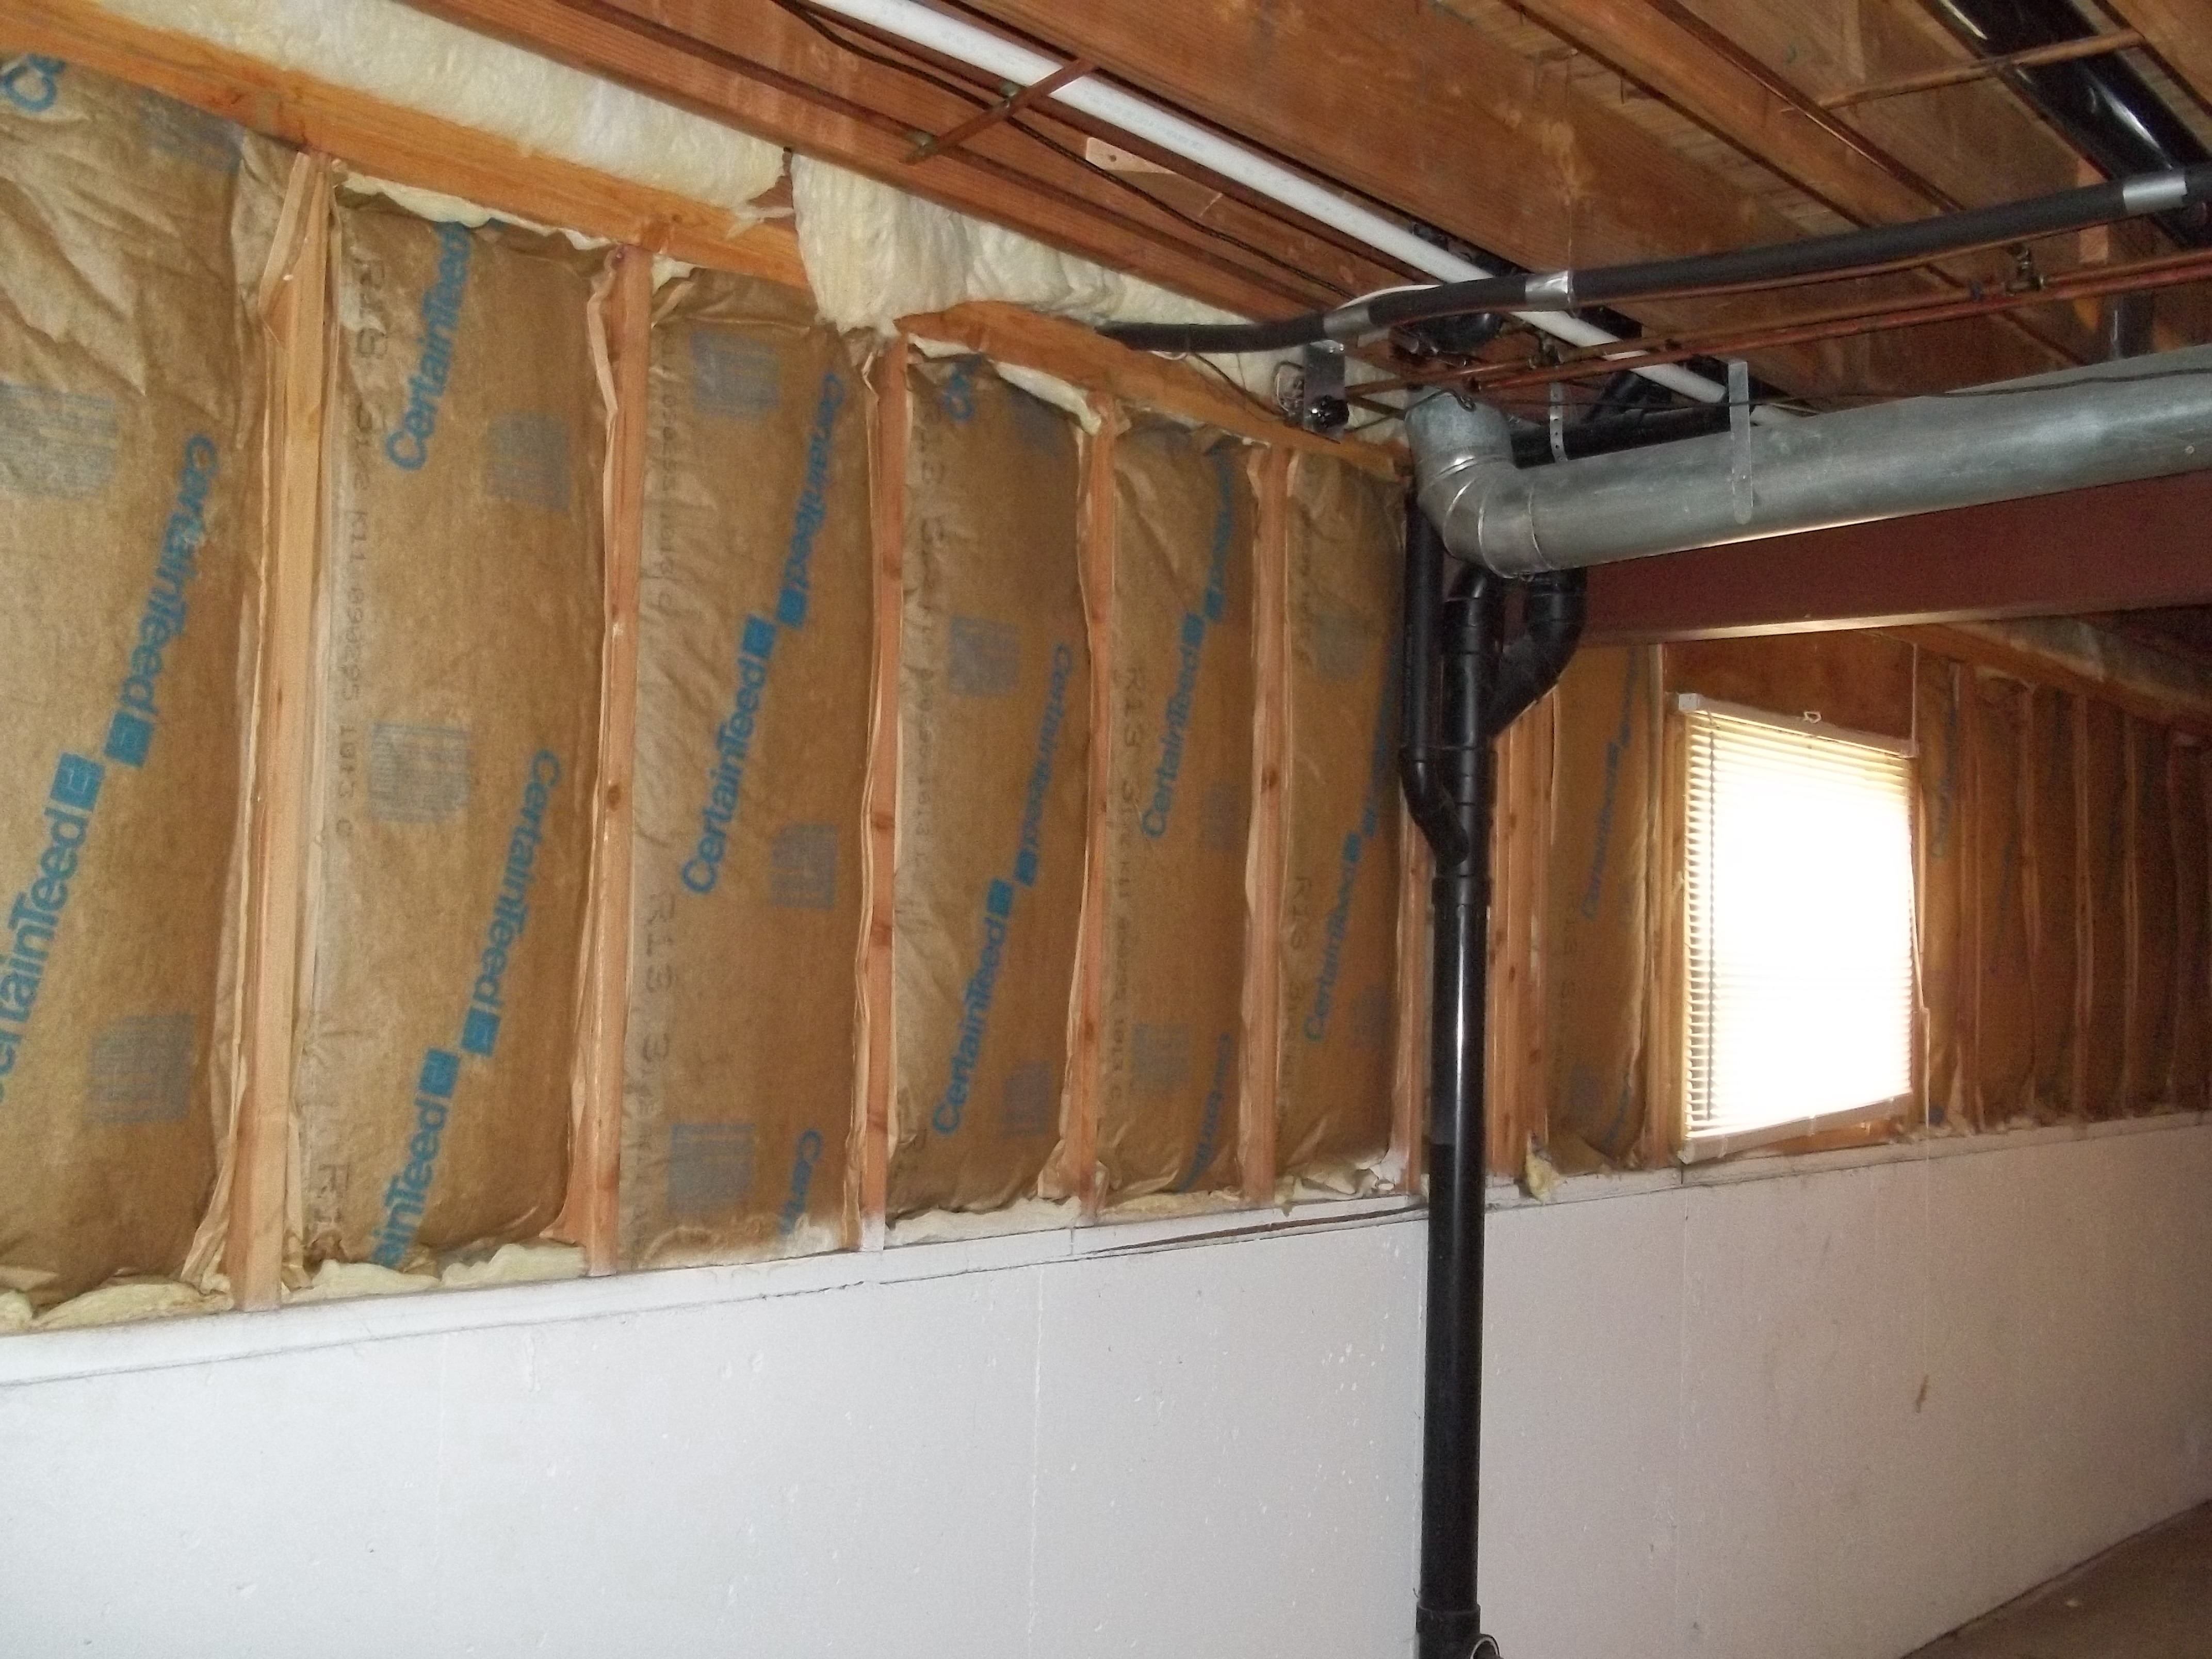 The Correct Way To Fix Exposed Walls In A Basement